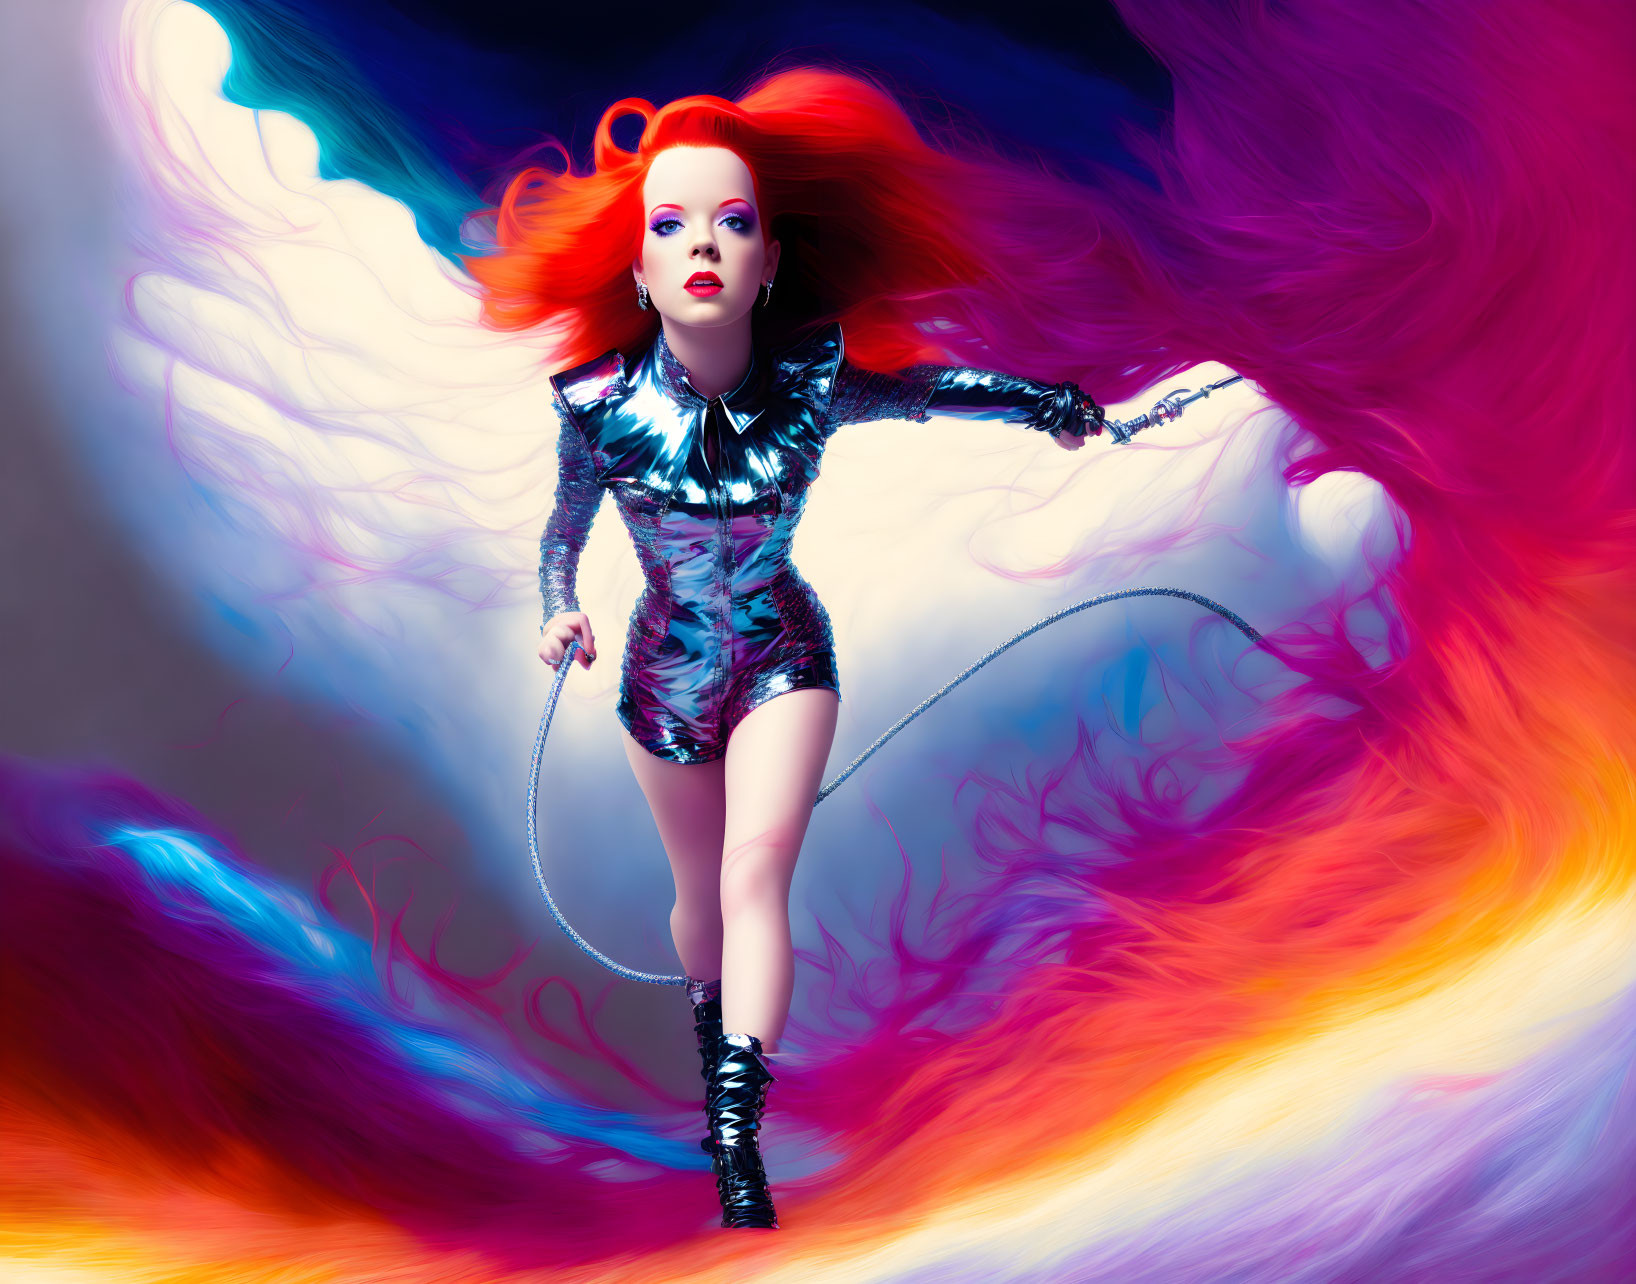 Vibrant red-haired woman poses with jump rope in futuristic outfit